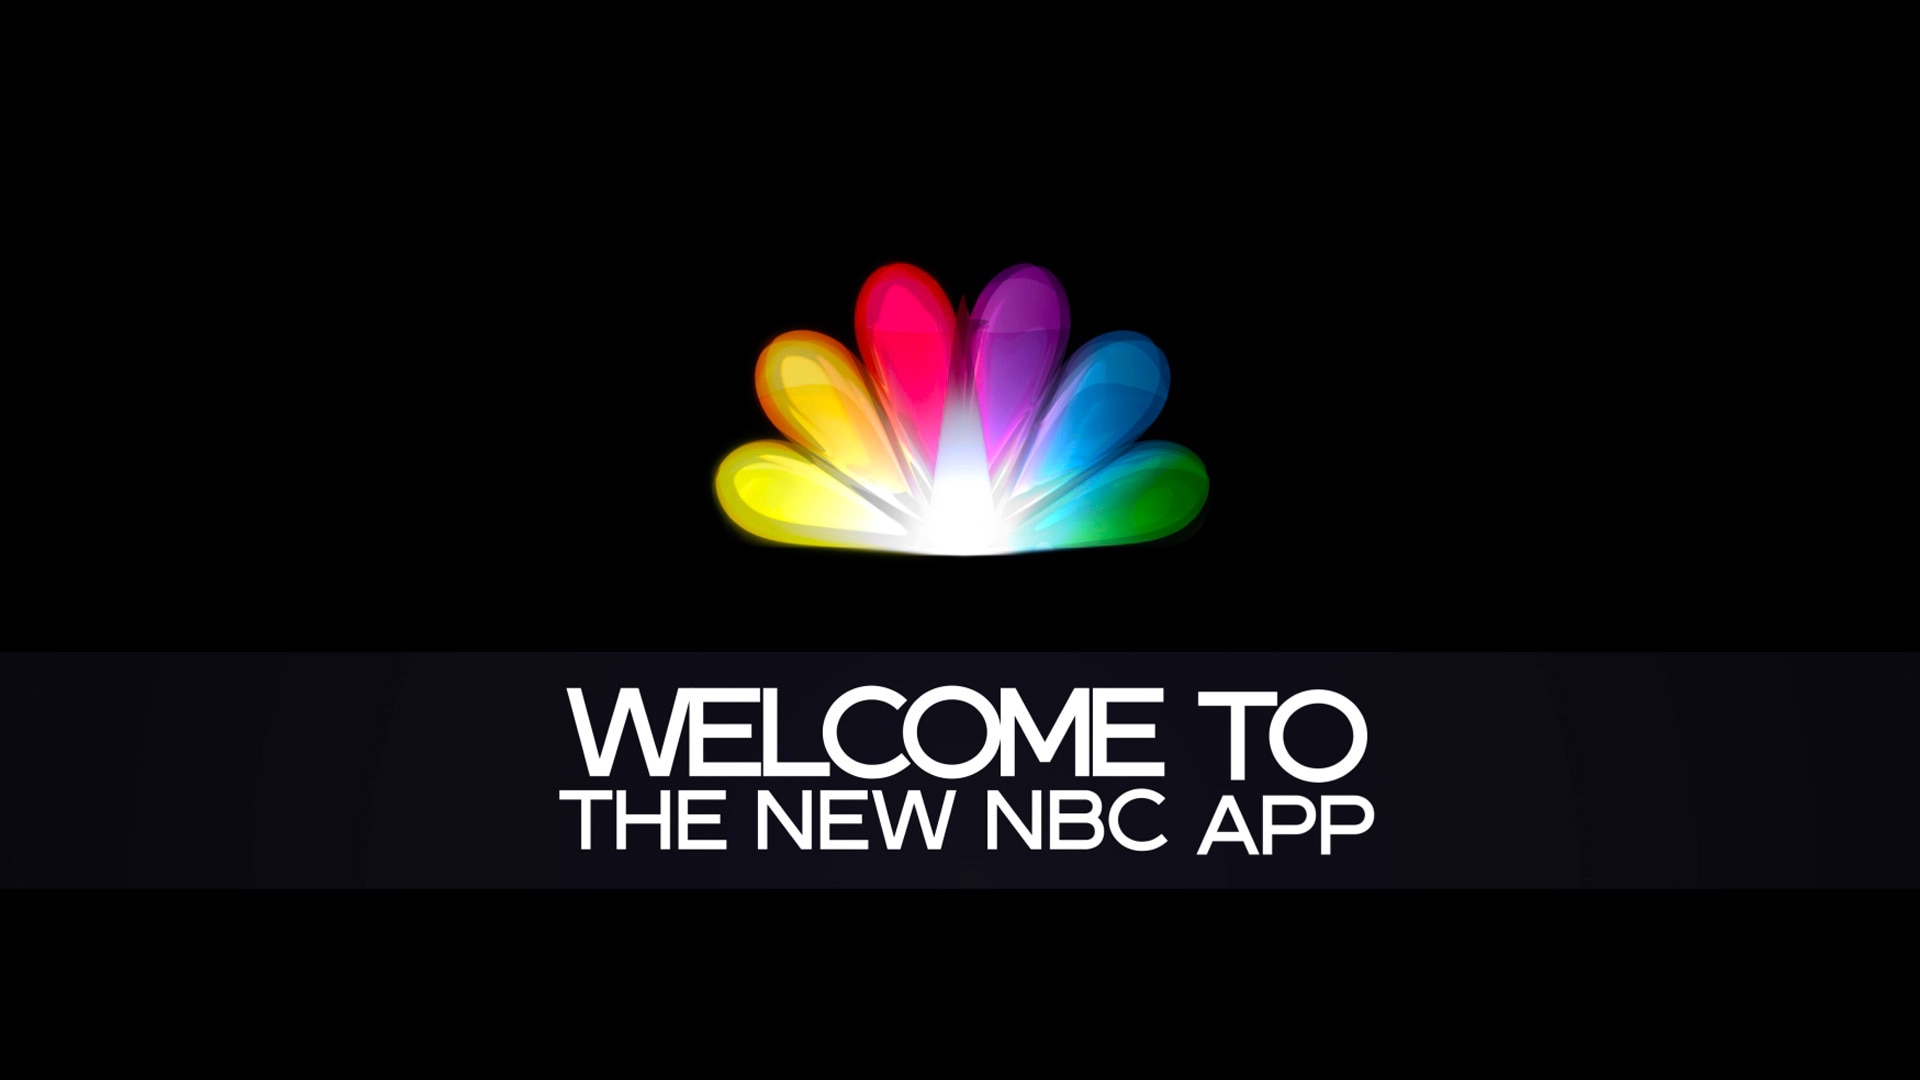 can i buy credits for nbc app